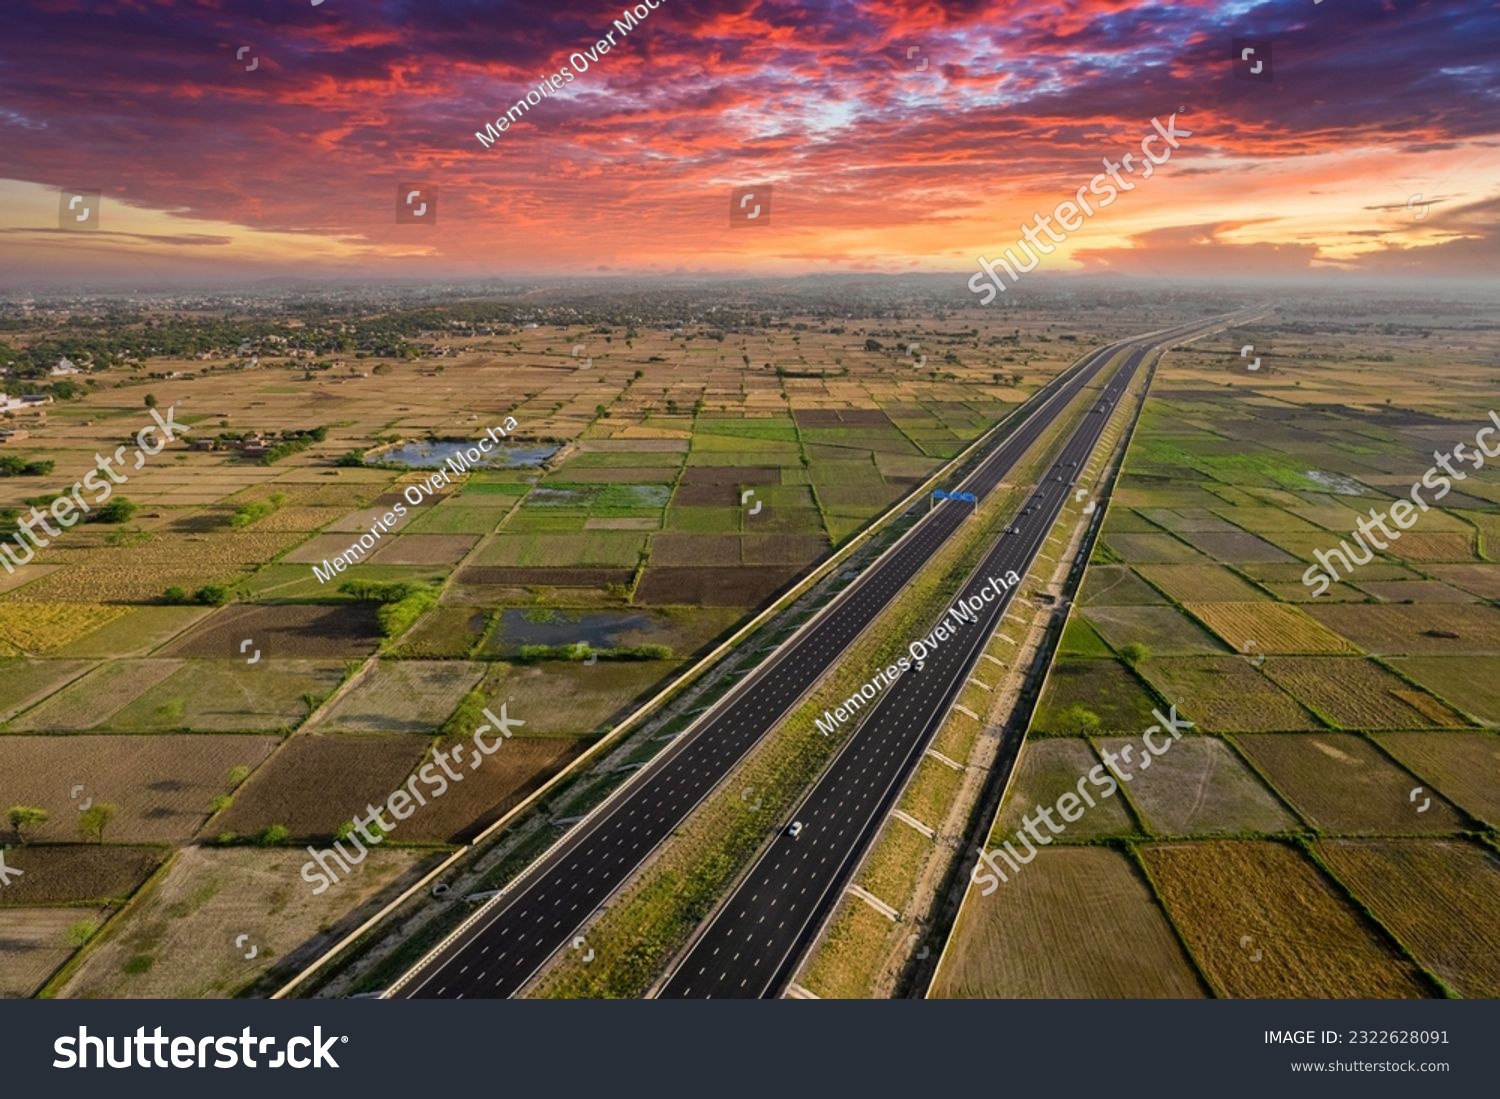 locked tripod aerial drone shot of new delhi mumbai jaipur express elevated highway showing six lane road with green feilds with rectangular farms on the sides #2322628091